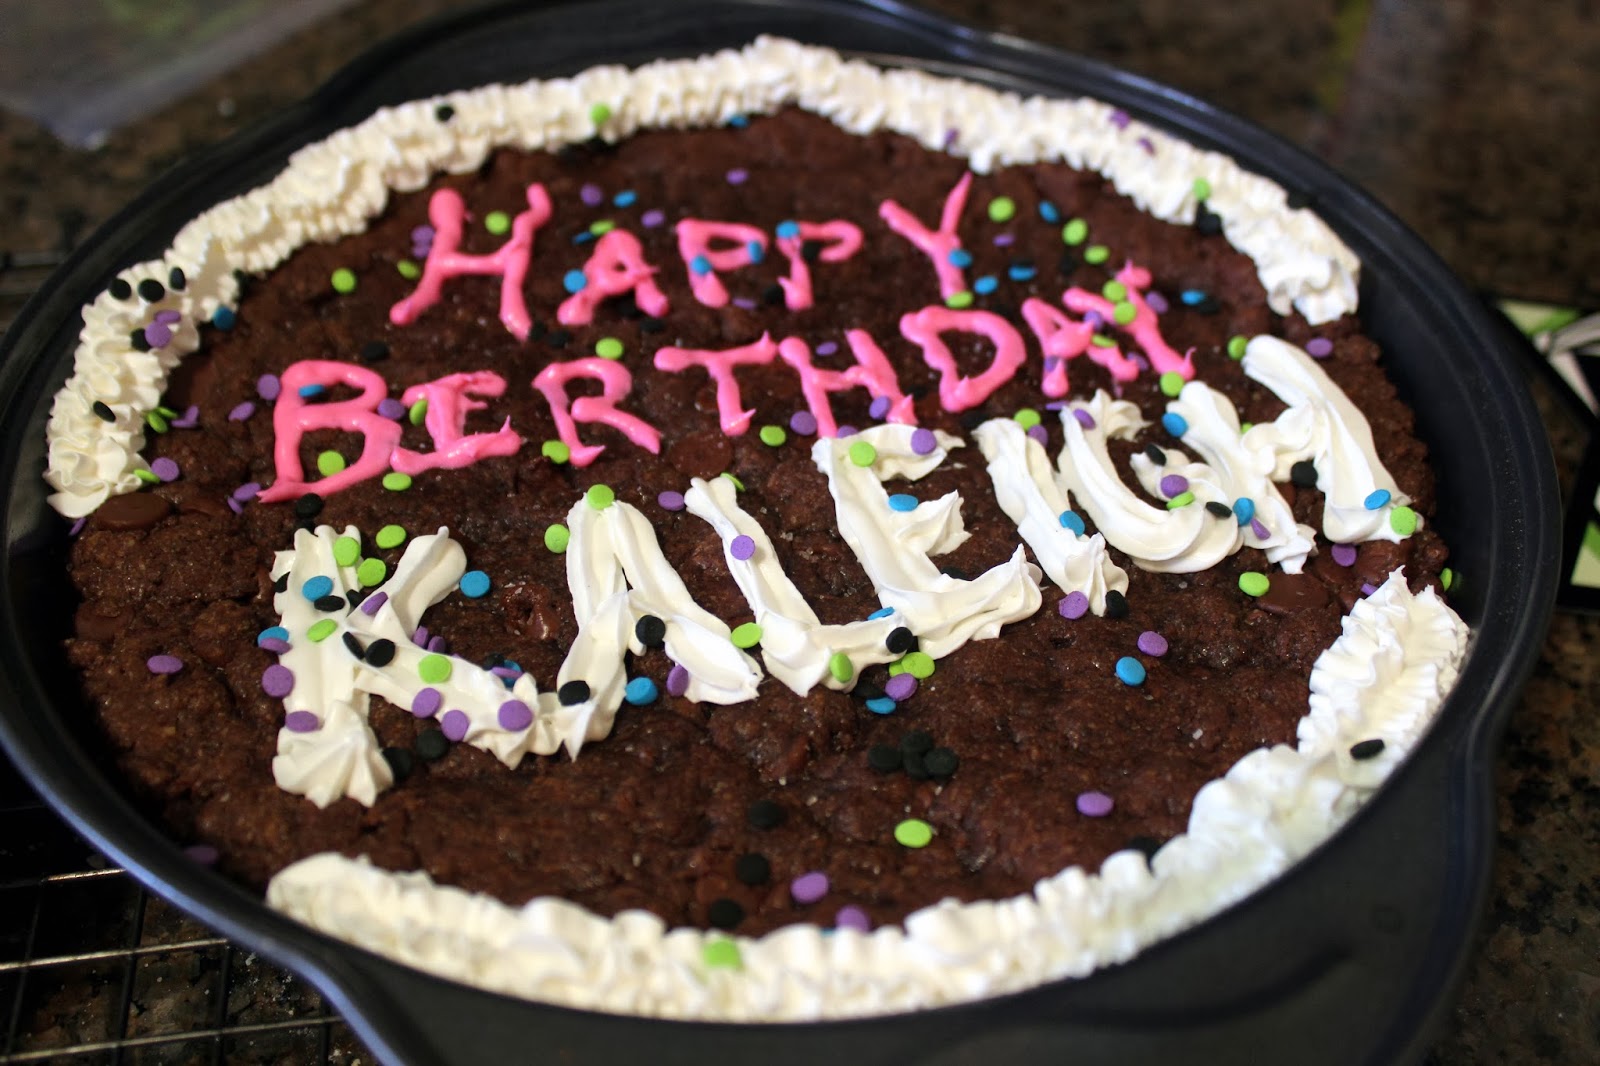 kaleigh turns 7 (and cookie cakes!)